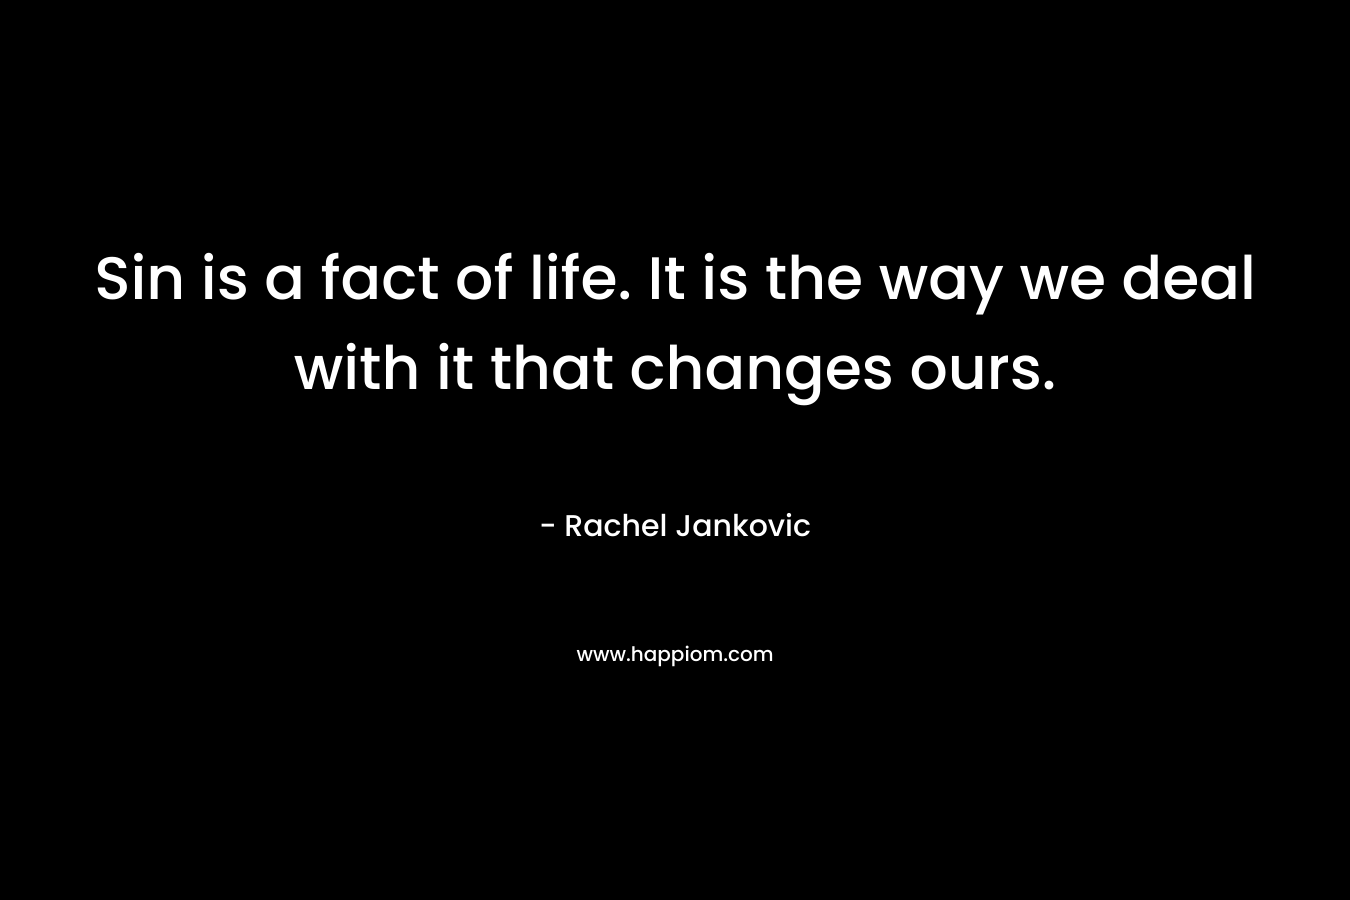 Sin is a fact of life. It is the way we deal with it that changes ours. – Rachel Jankovic